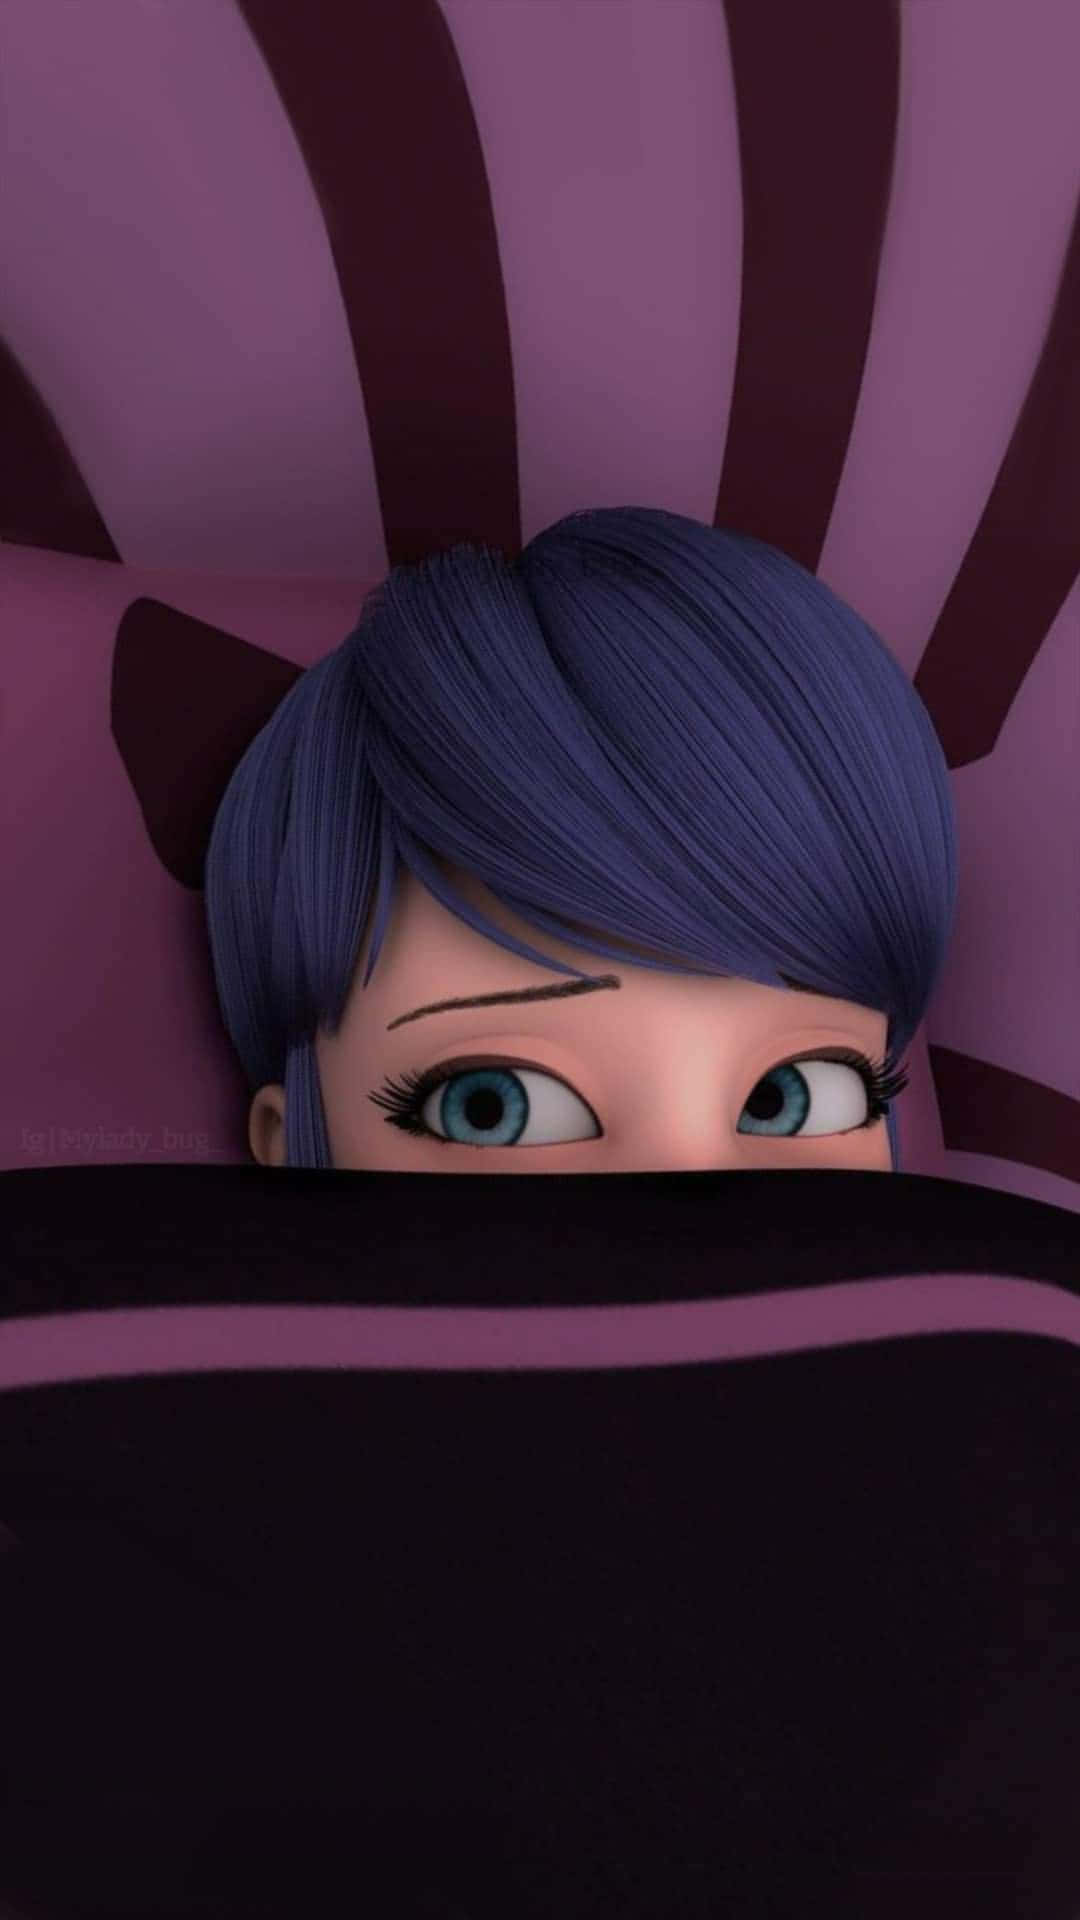 Caption: Charming Marinette posing in a fashionable outfit